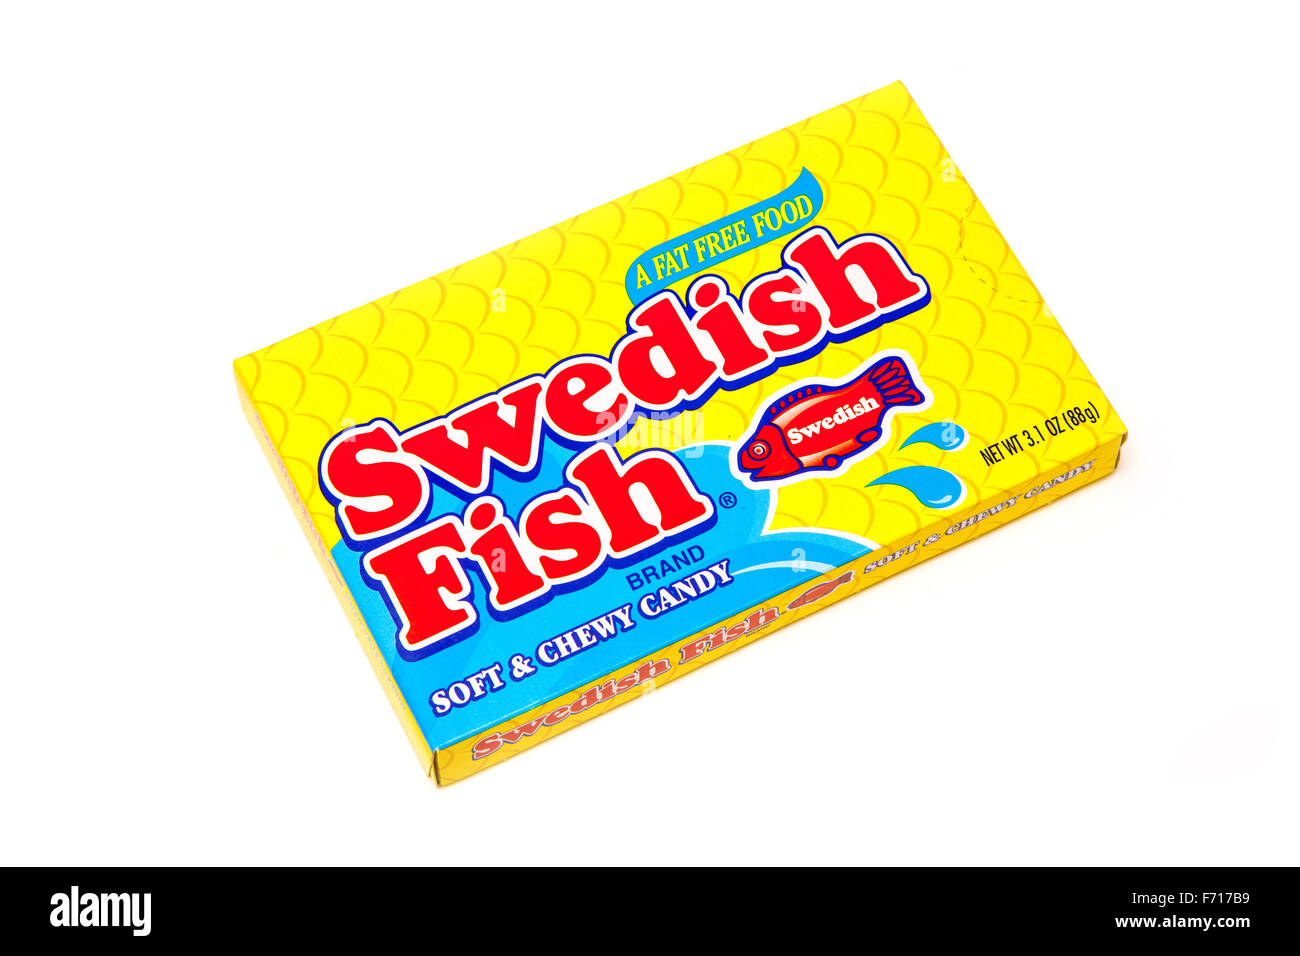 Swedish fish candy Cut Out Stock Images & Pictures - Alamy